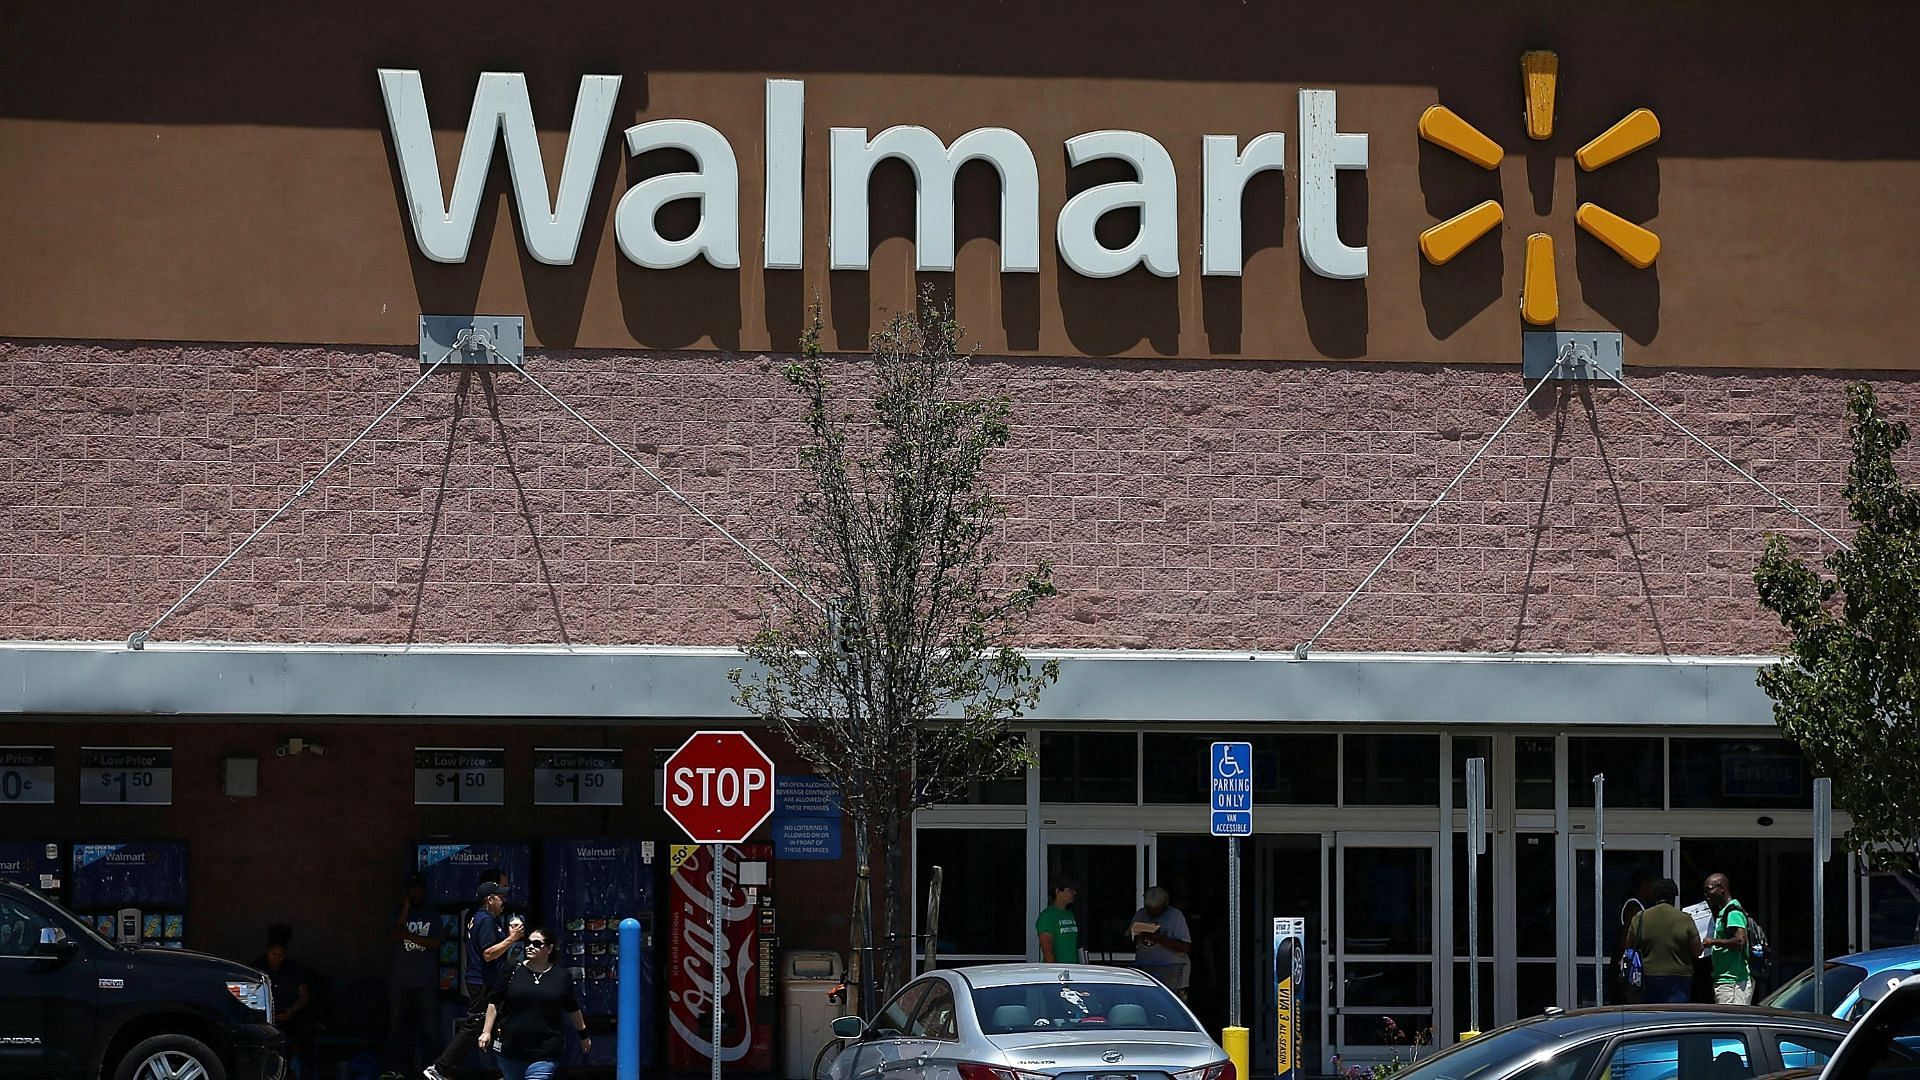 Walmart announces the closure of four stores in Chicago as they have failed to be profitable for the last 17 years (Image via Justin Sullivan/GettyImages)